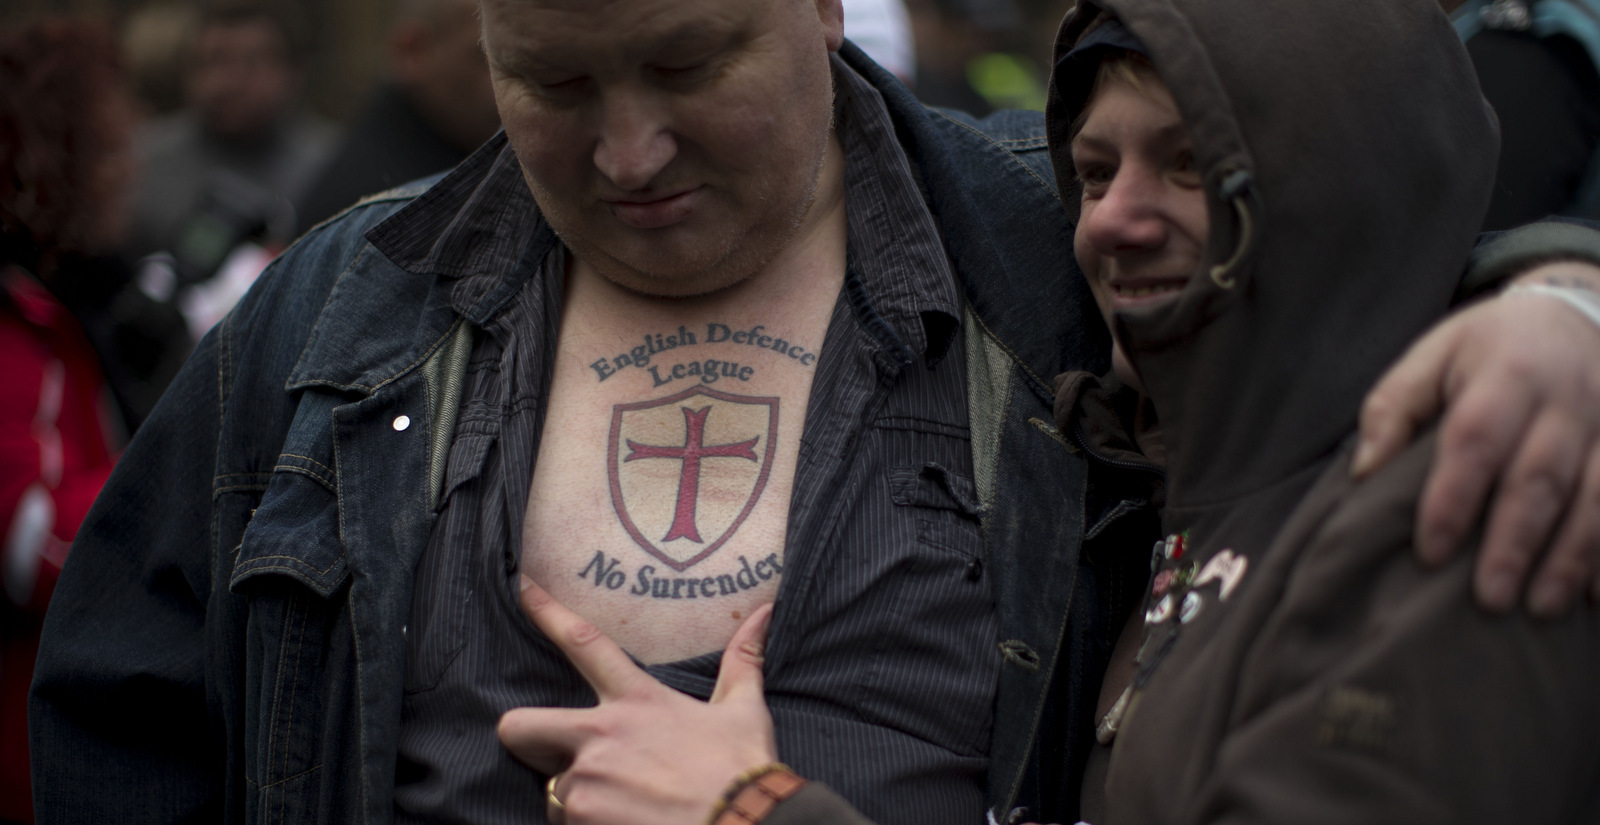 A member of the English Defence League far right group has his tattoo displayed for media cameras during a protest outside the Houses of Parliament in London, Oct. 27, 2012. (AP/Matt Dunham)